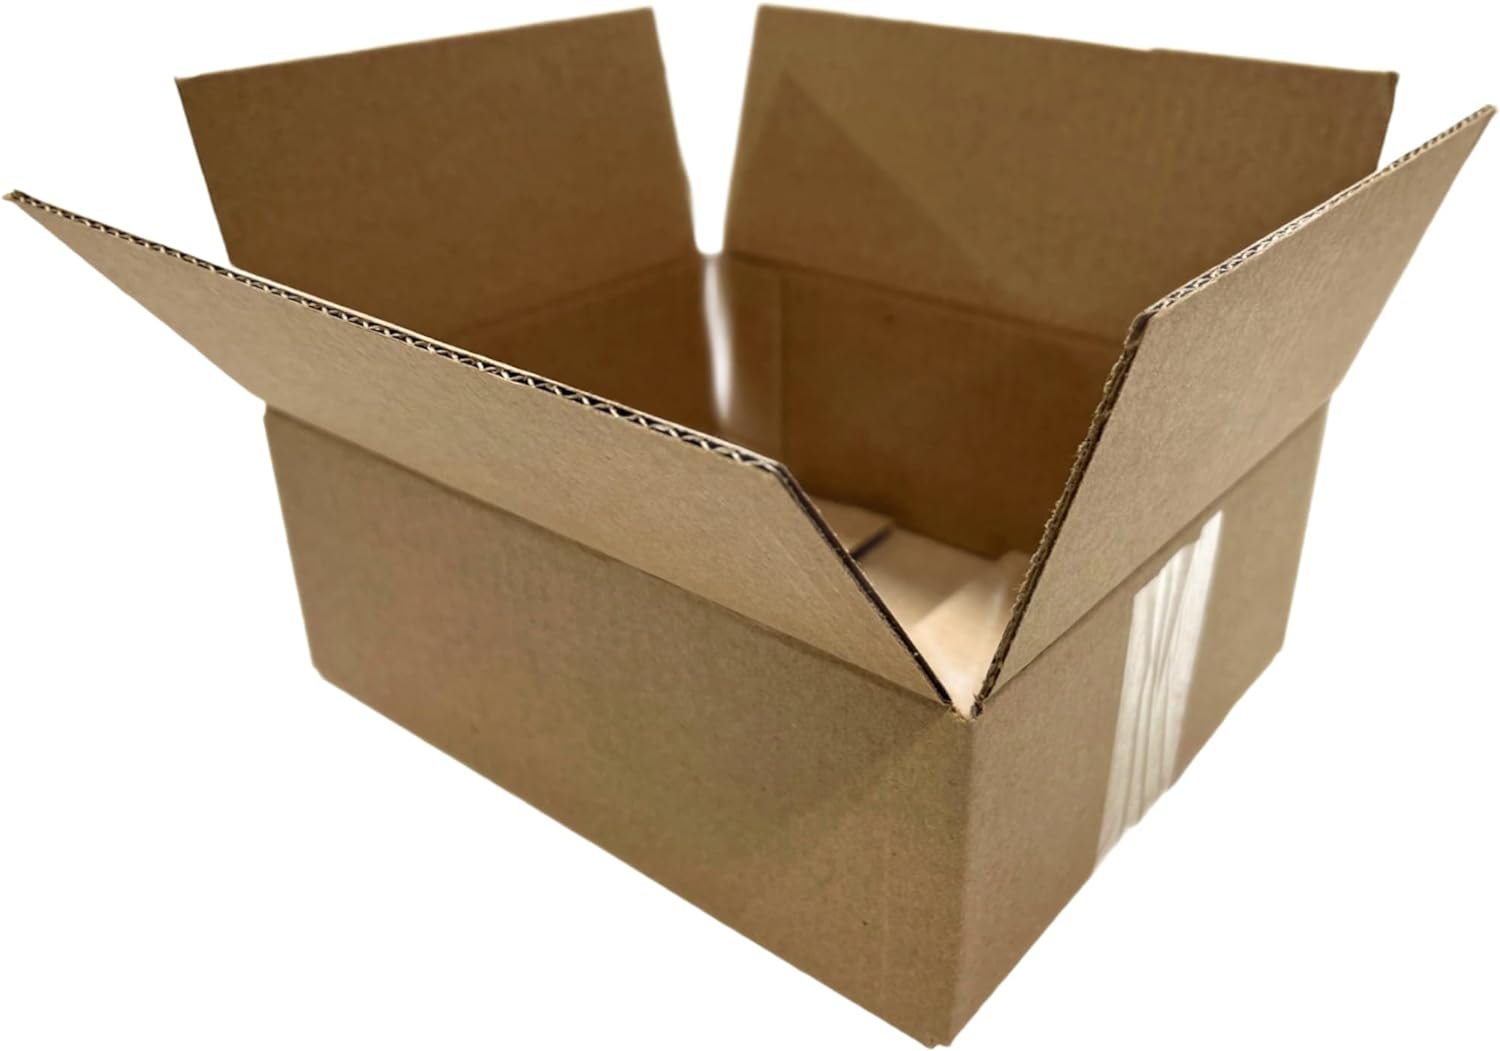 25 6x4x4 Cardboard Paper Boxes Mailing Packing Shipping Box Corrugated Carton